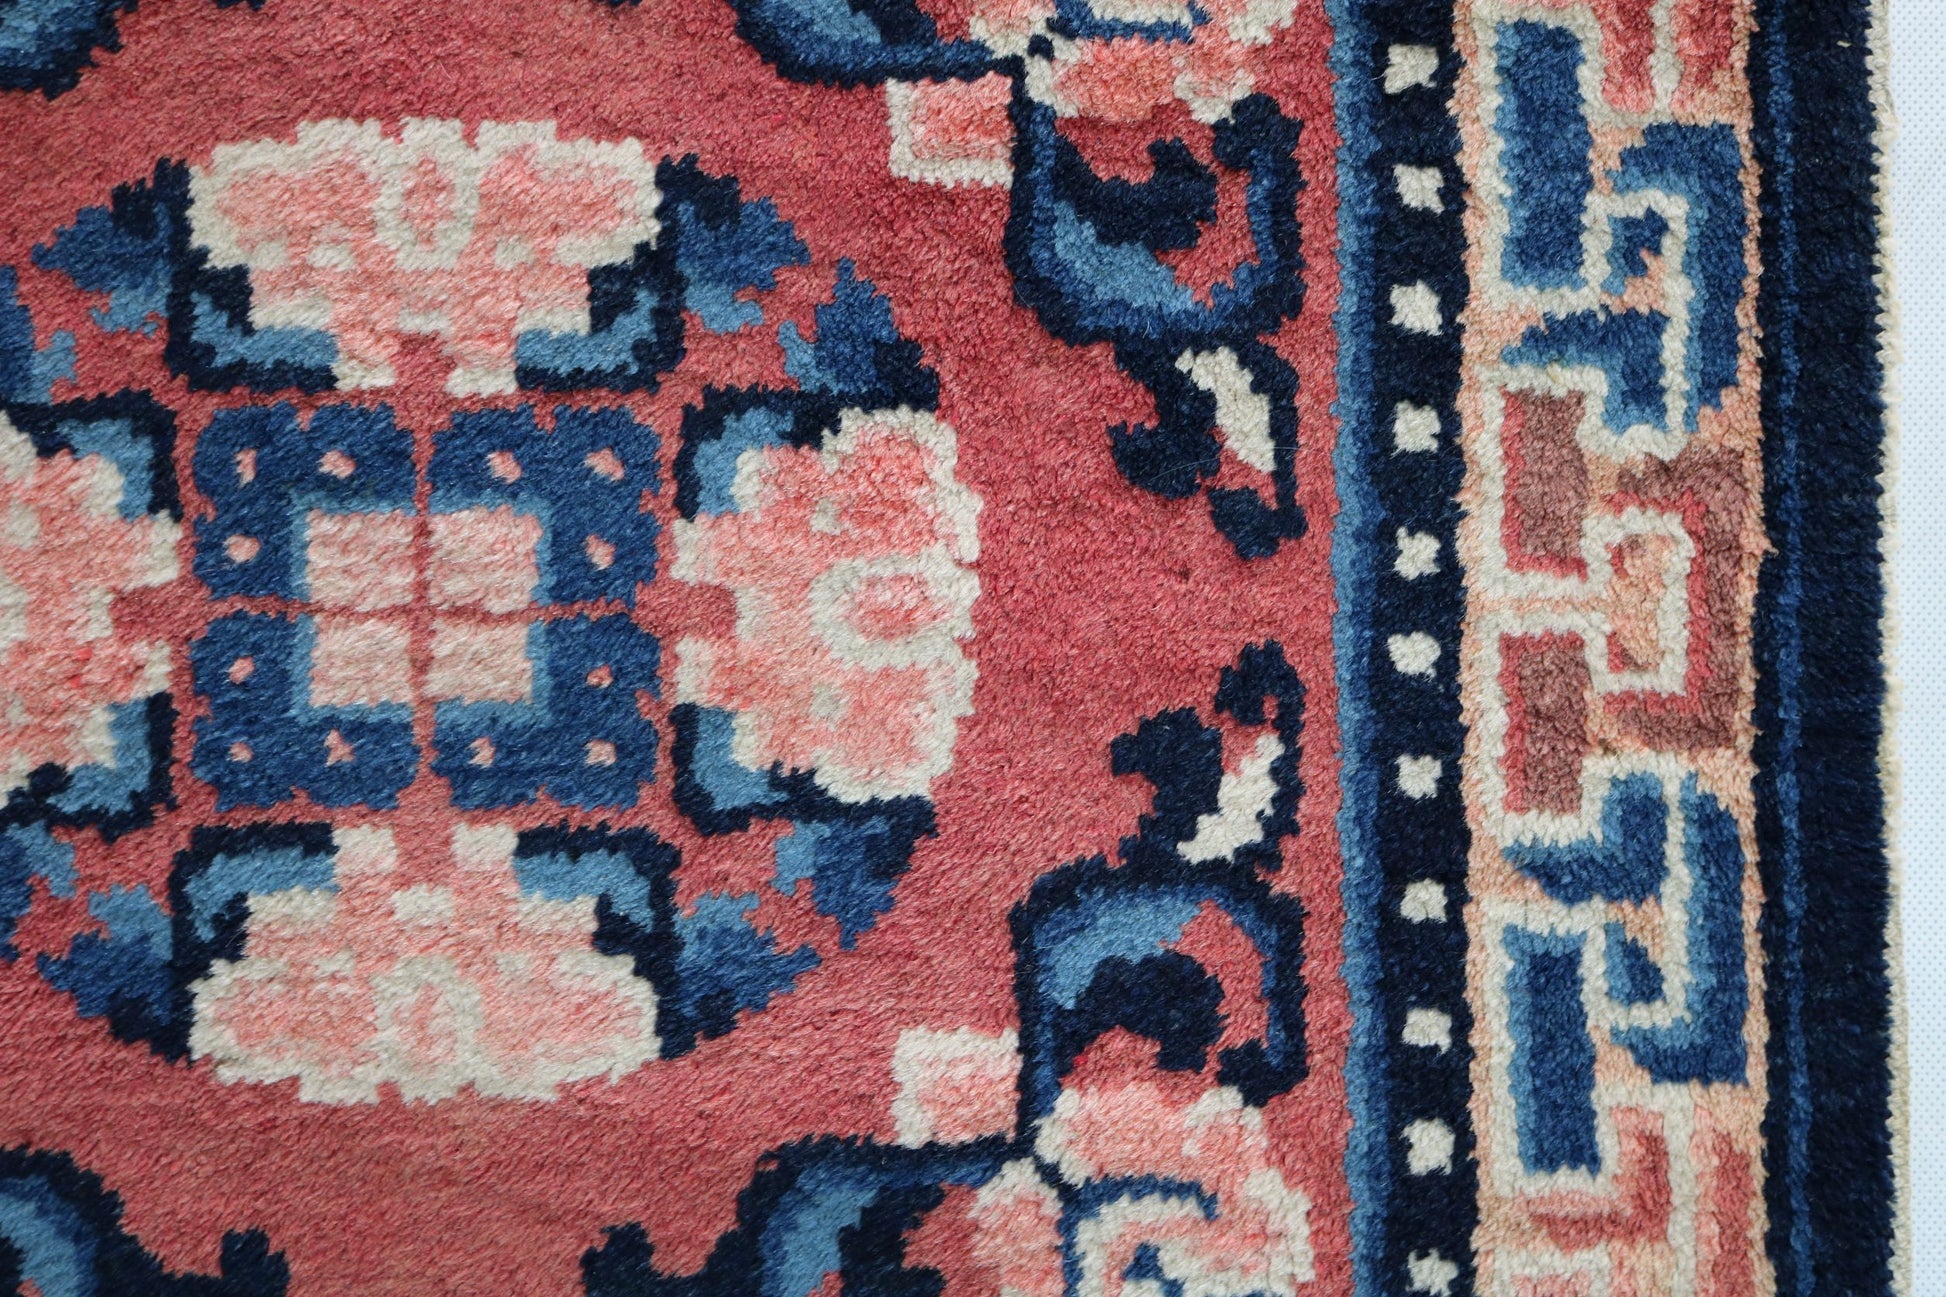 Antique Chinese small rug - Hakiemie Rug Gallery